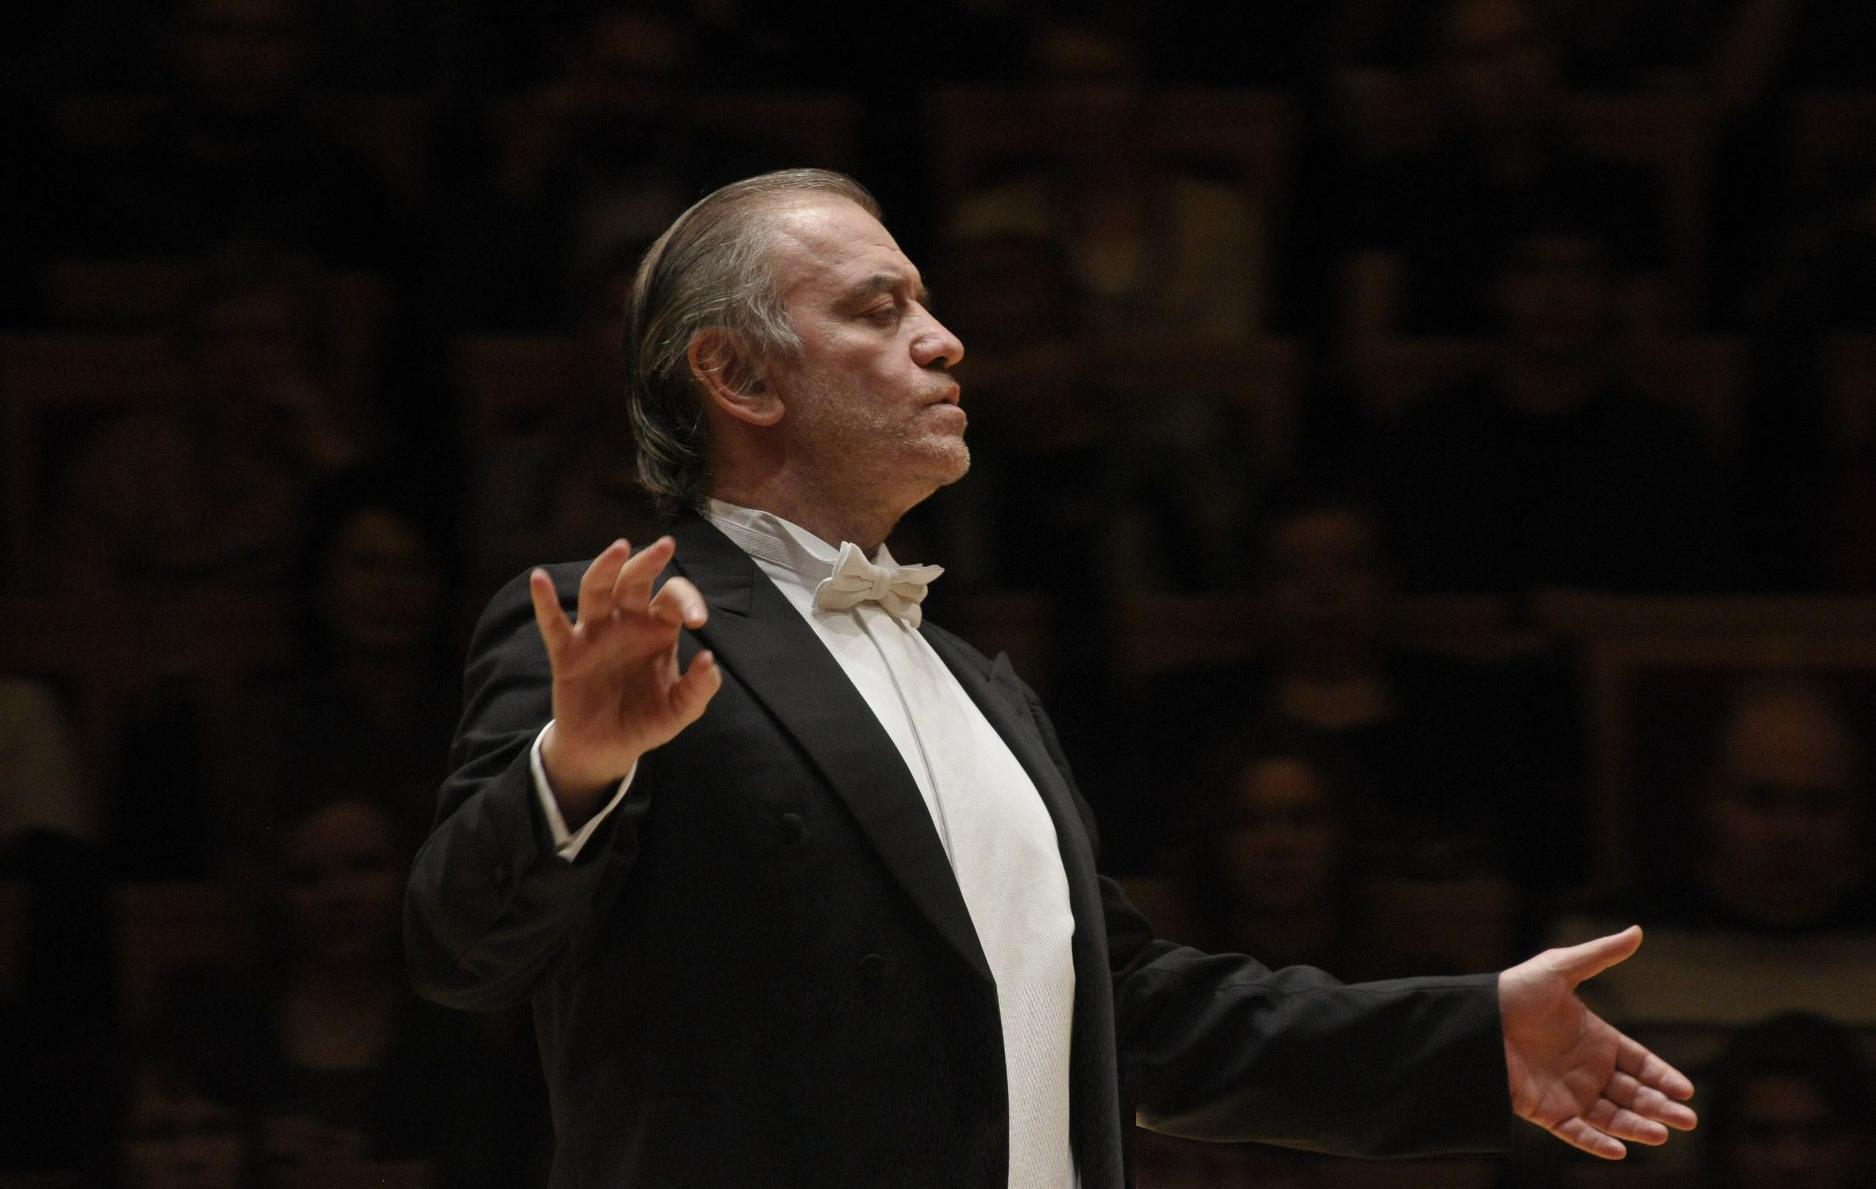 Mariinsky Symphony Orchestra and soloists Conductor Valery Gergiev